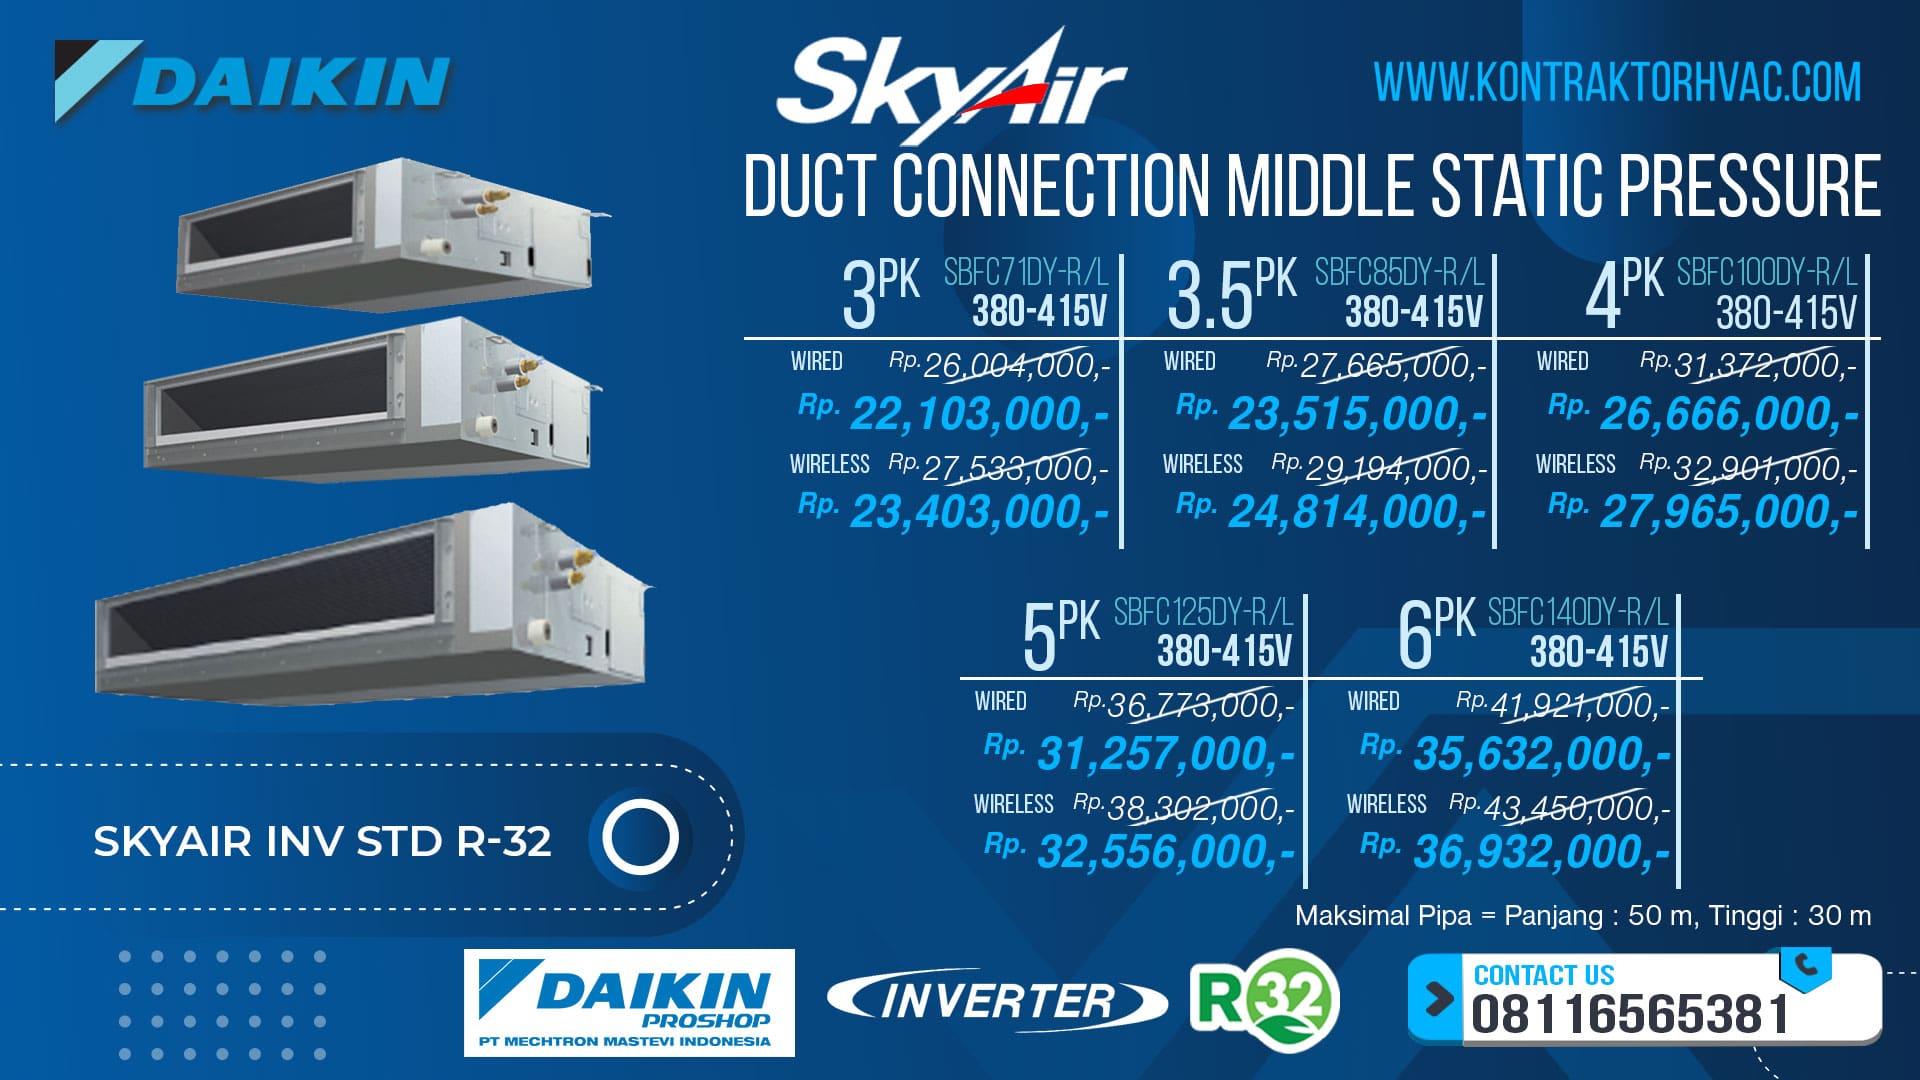 5.Skyair-Inv-STD-R-32-Duct-Connection-Middle-Static-Pressure-y-min